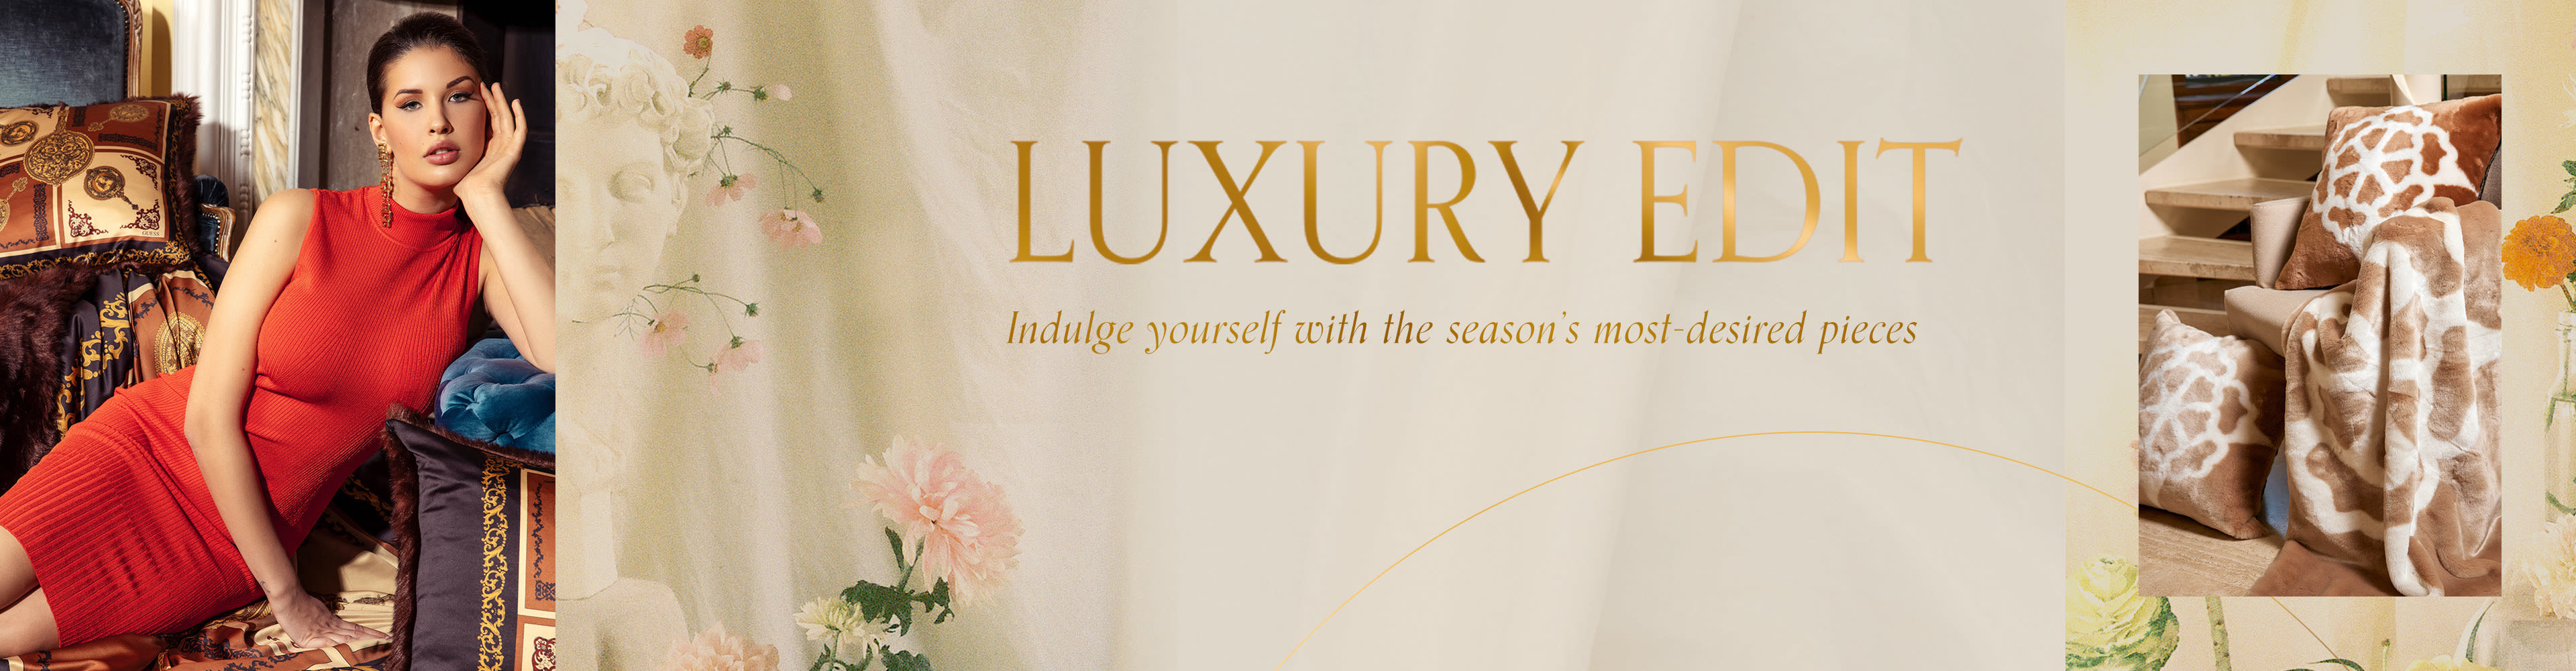 Luxury Edit Indulge yourself with the season’s most-desired piece